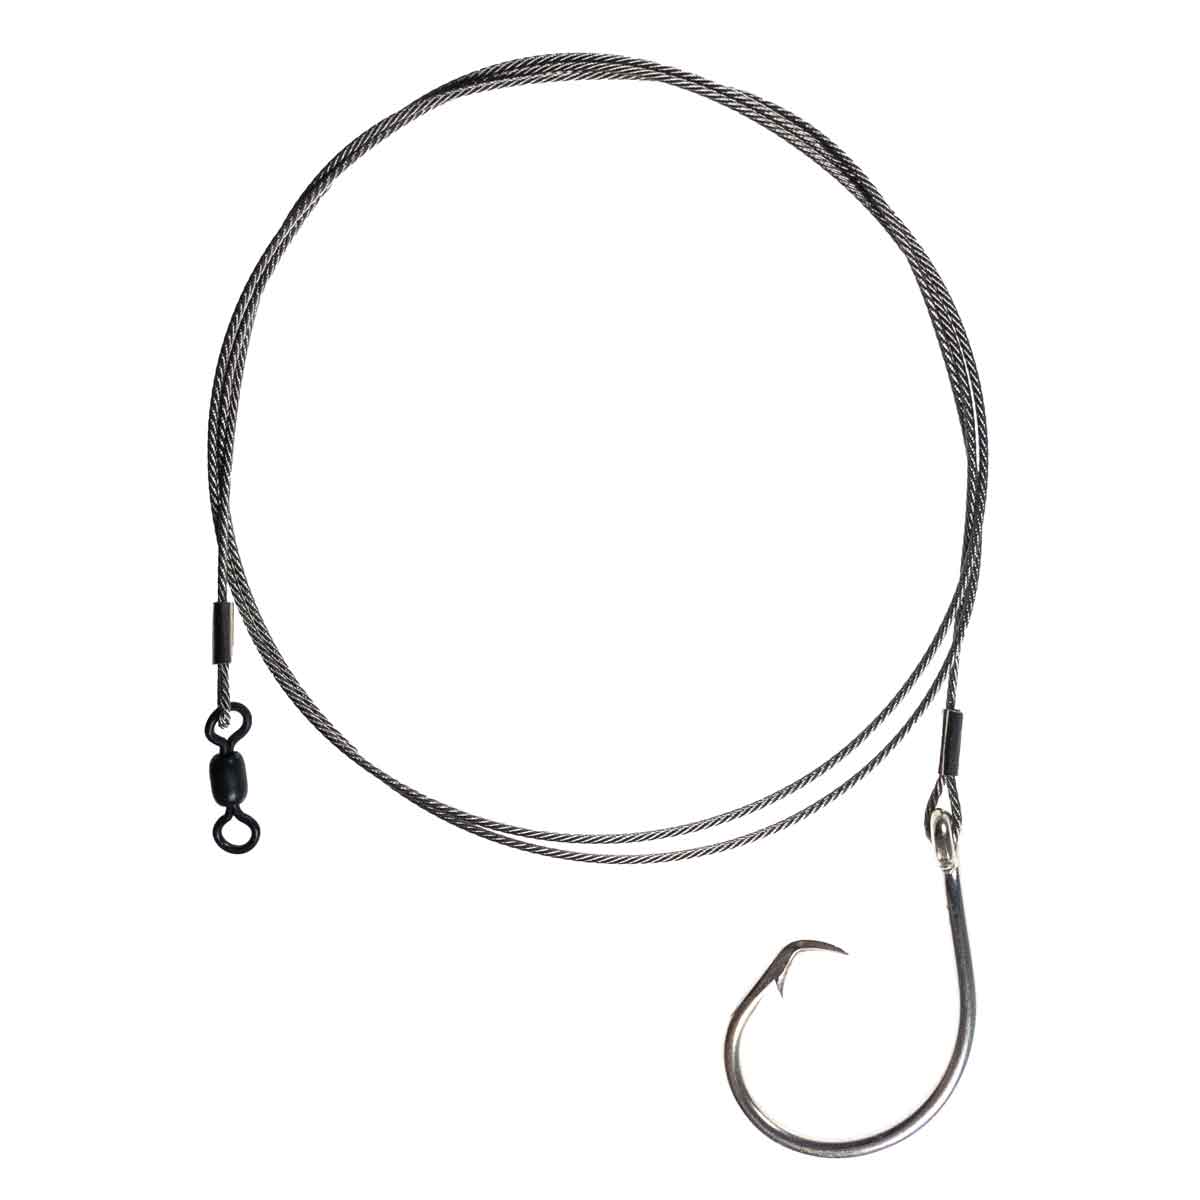 WIRE SHARK TRACE 200LB WITH 12/0 CIRCLE HOOK - Tackle Direct Ireland